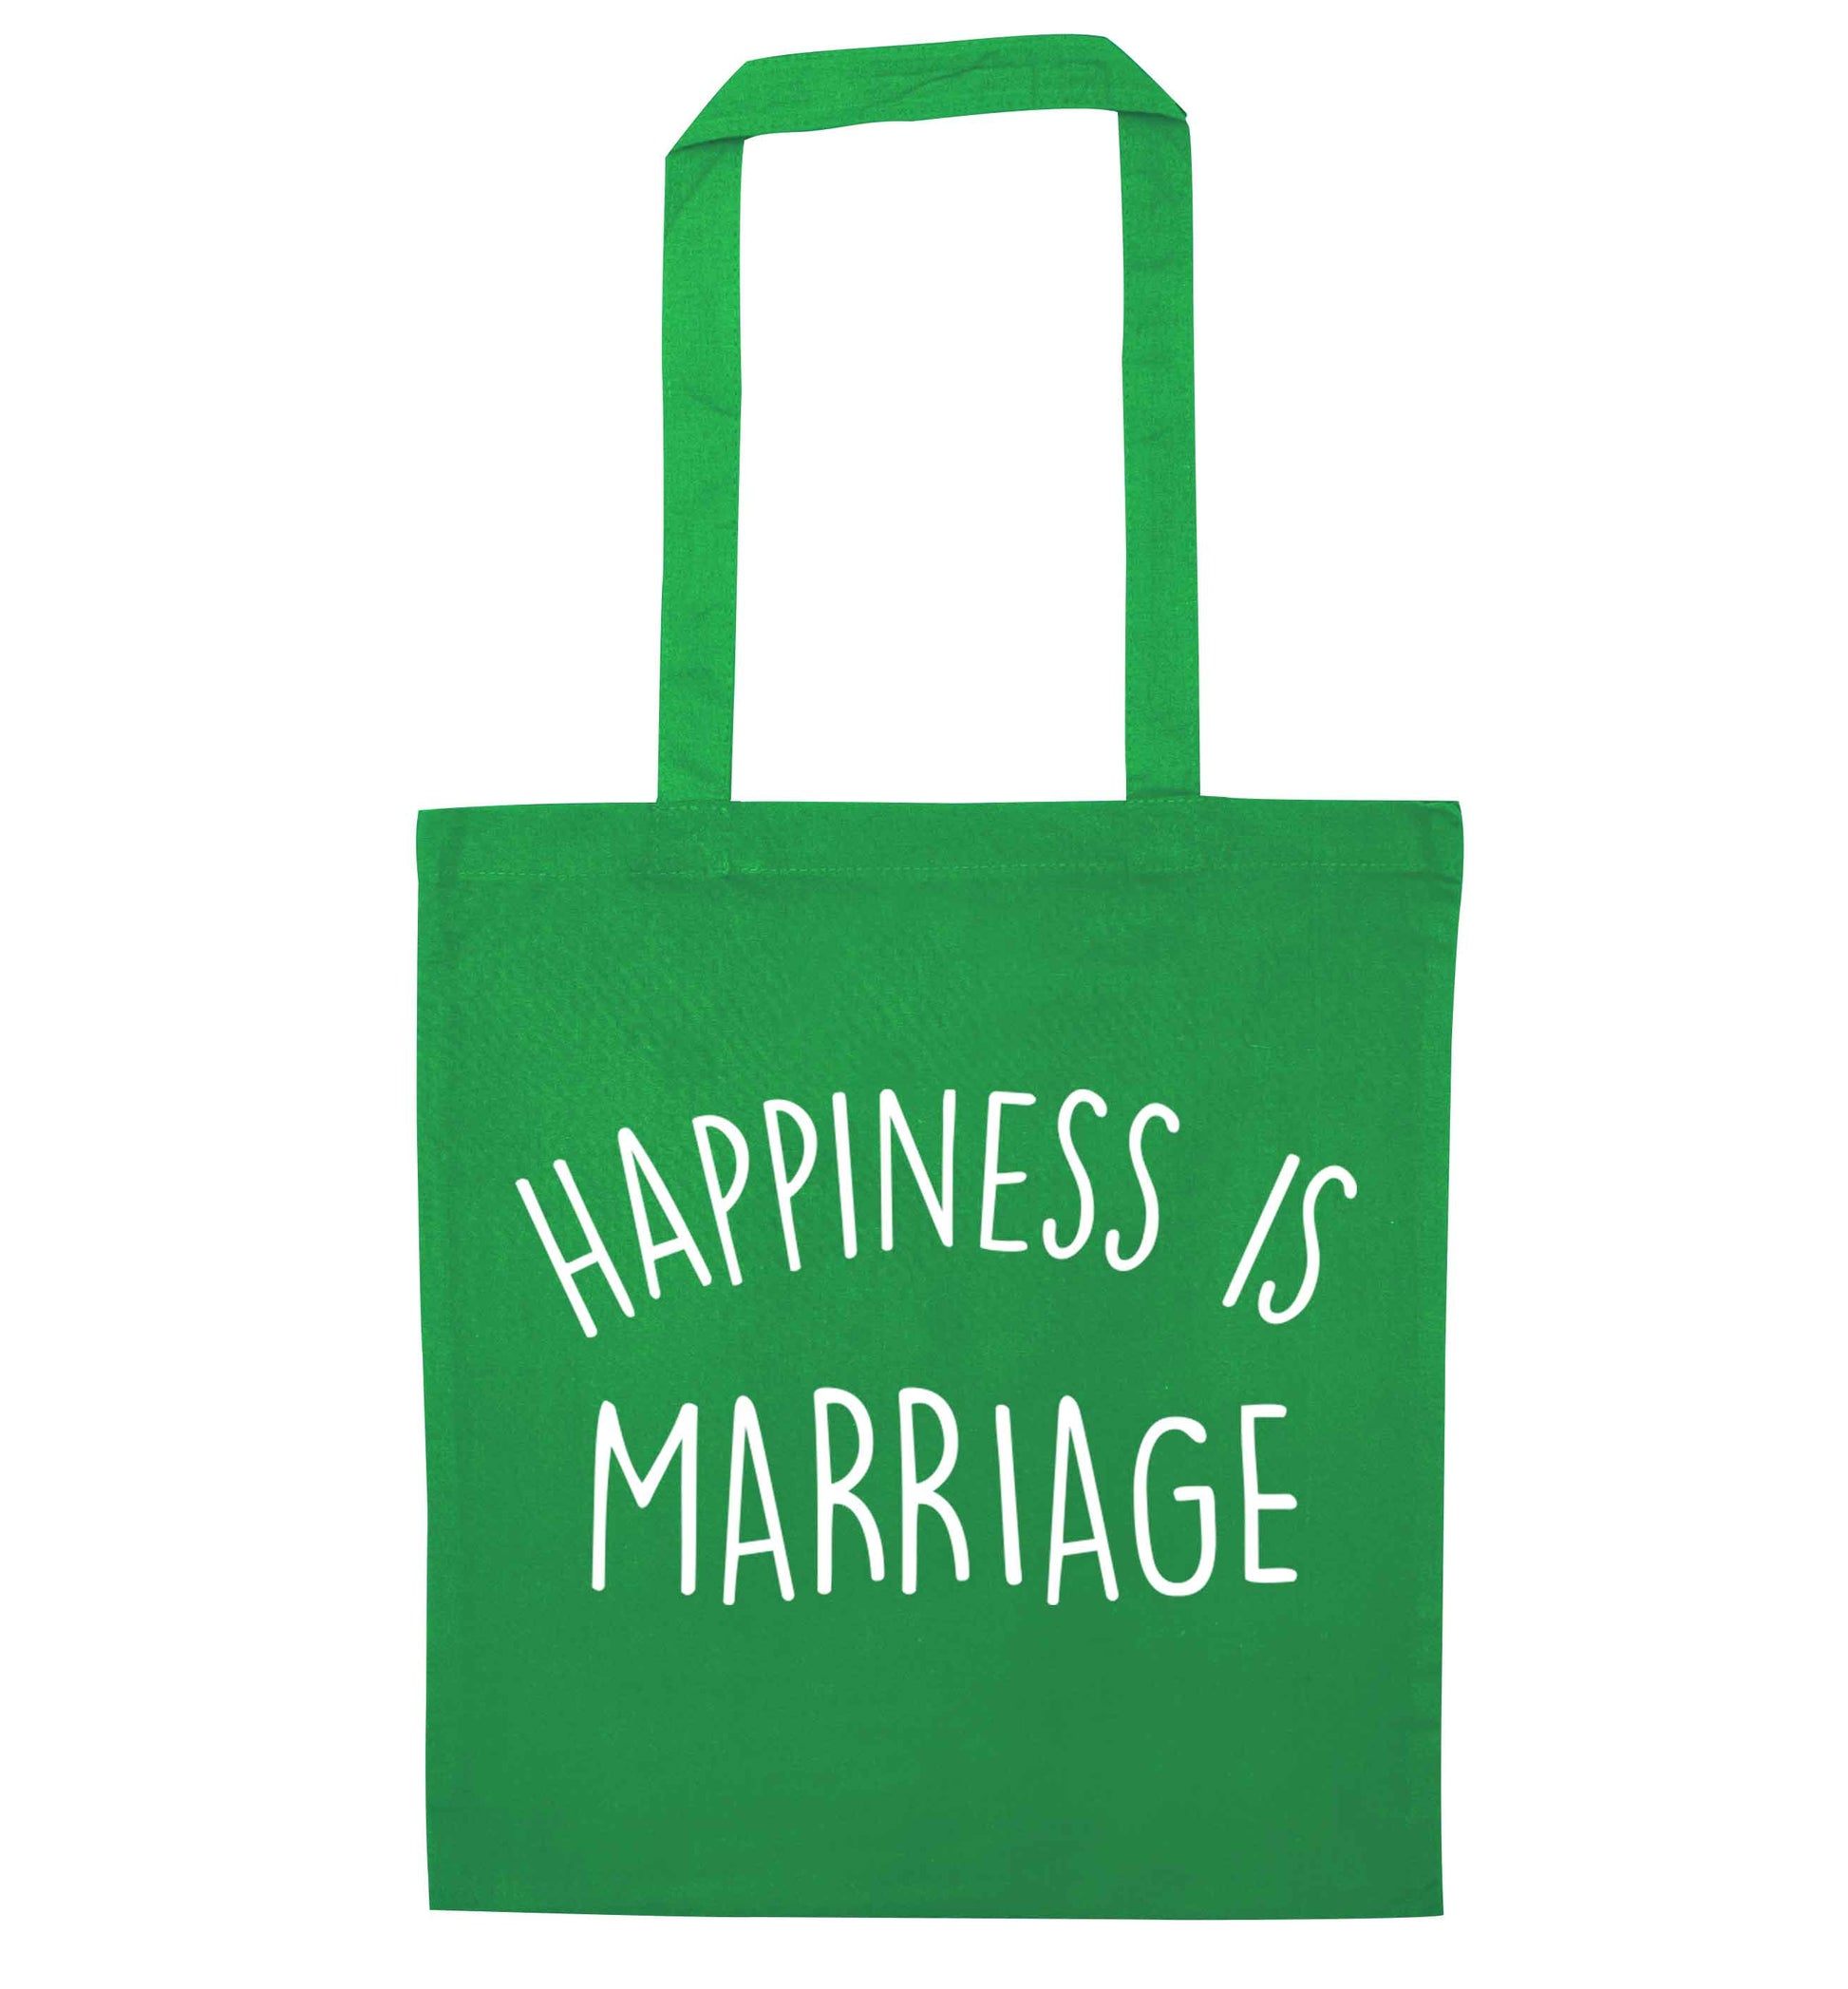 Happiness is wedding planning green tote bag